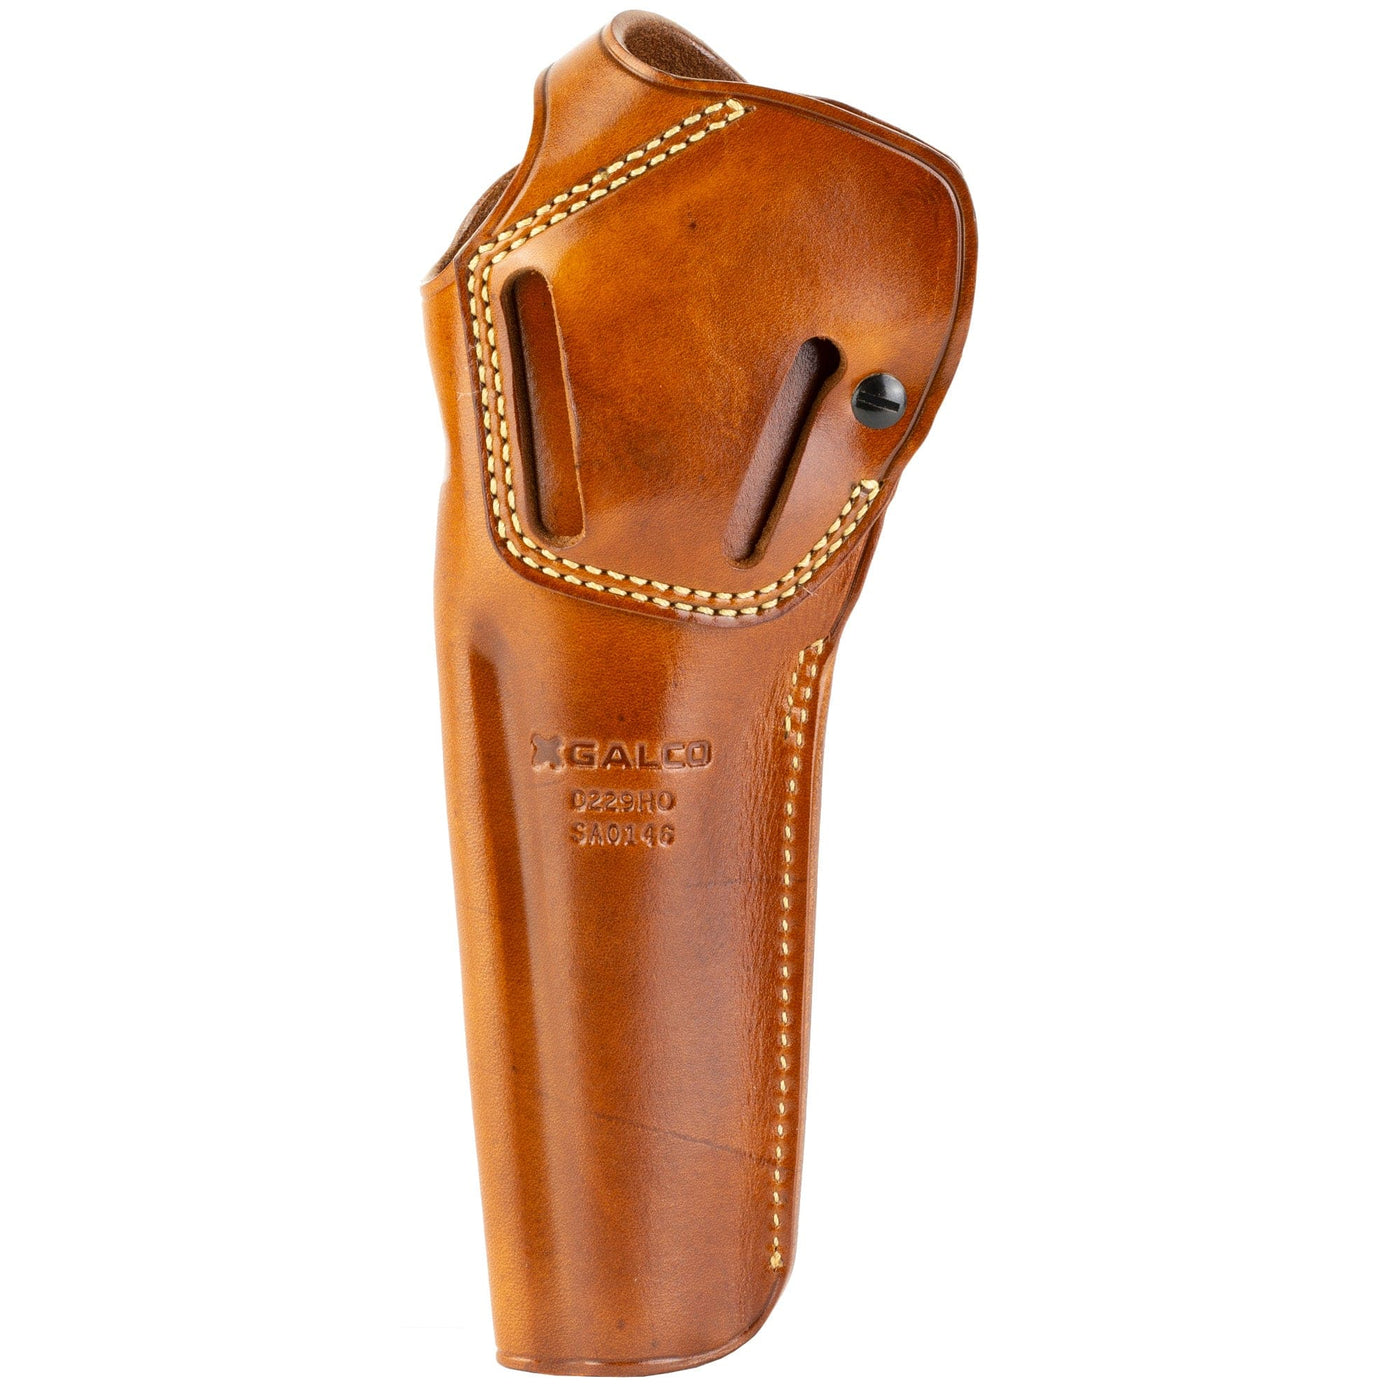 Galco Galco Sao Belt Holster Rh - Leather Ruger 6 1/2" Bbl Tan Firearm Accessories